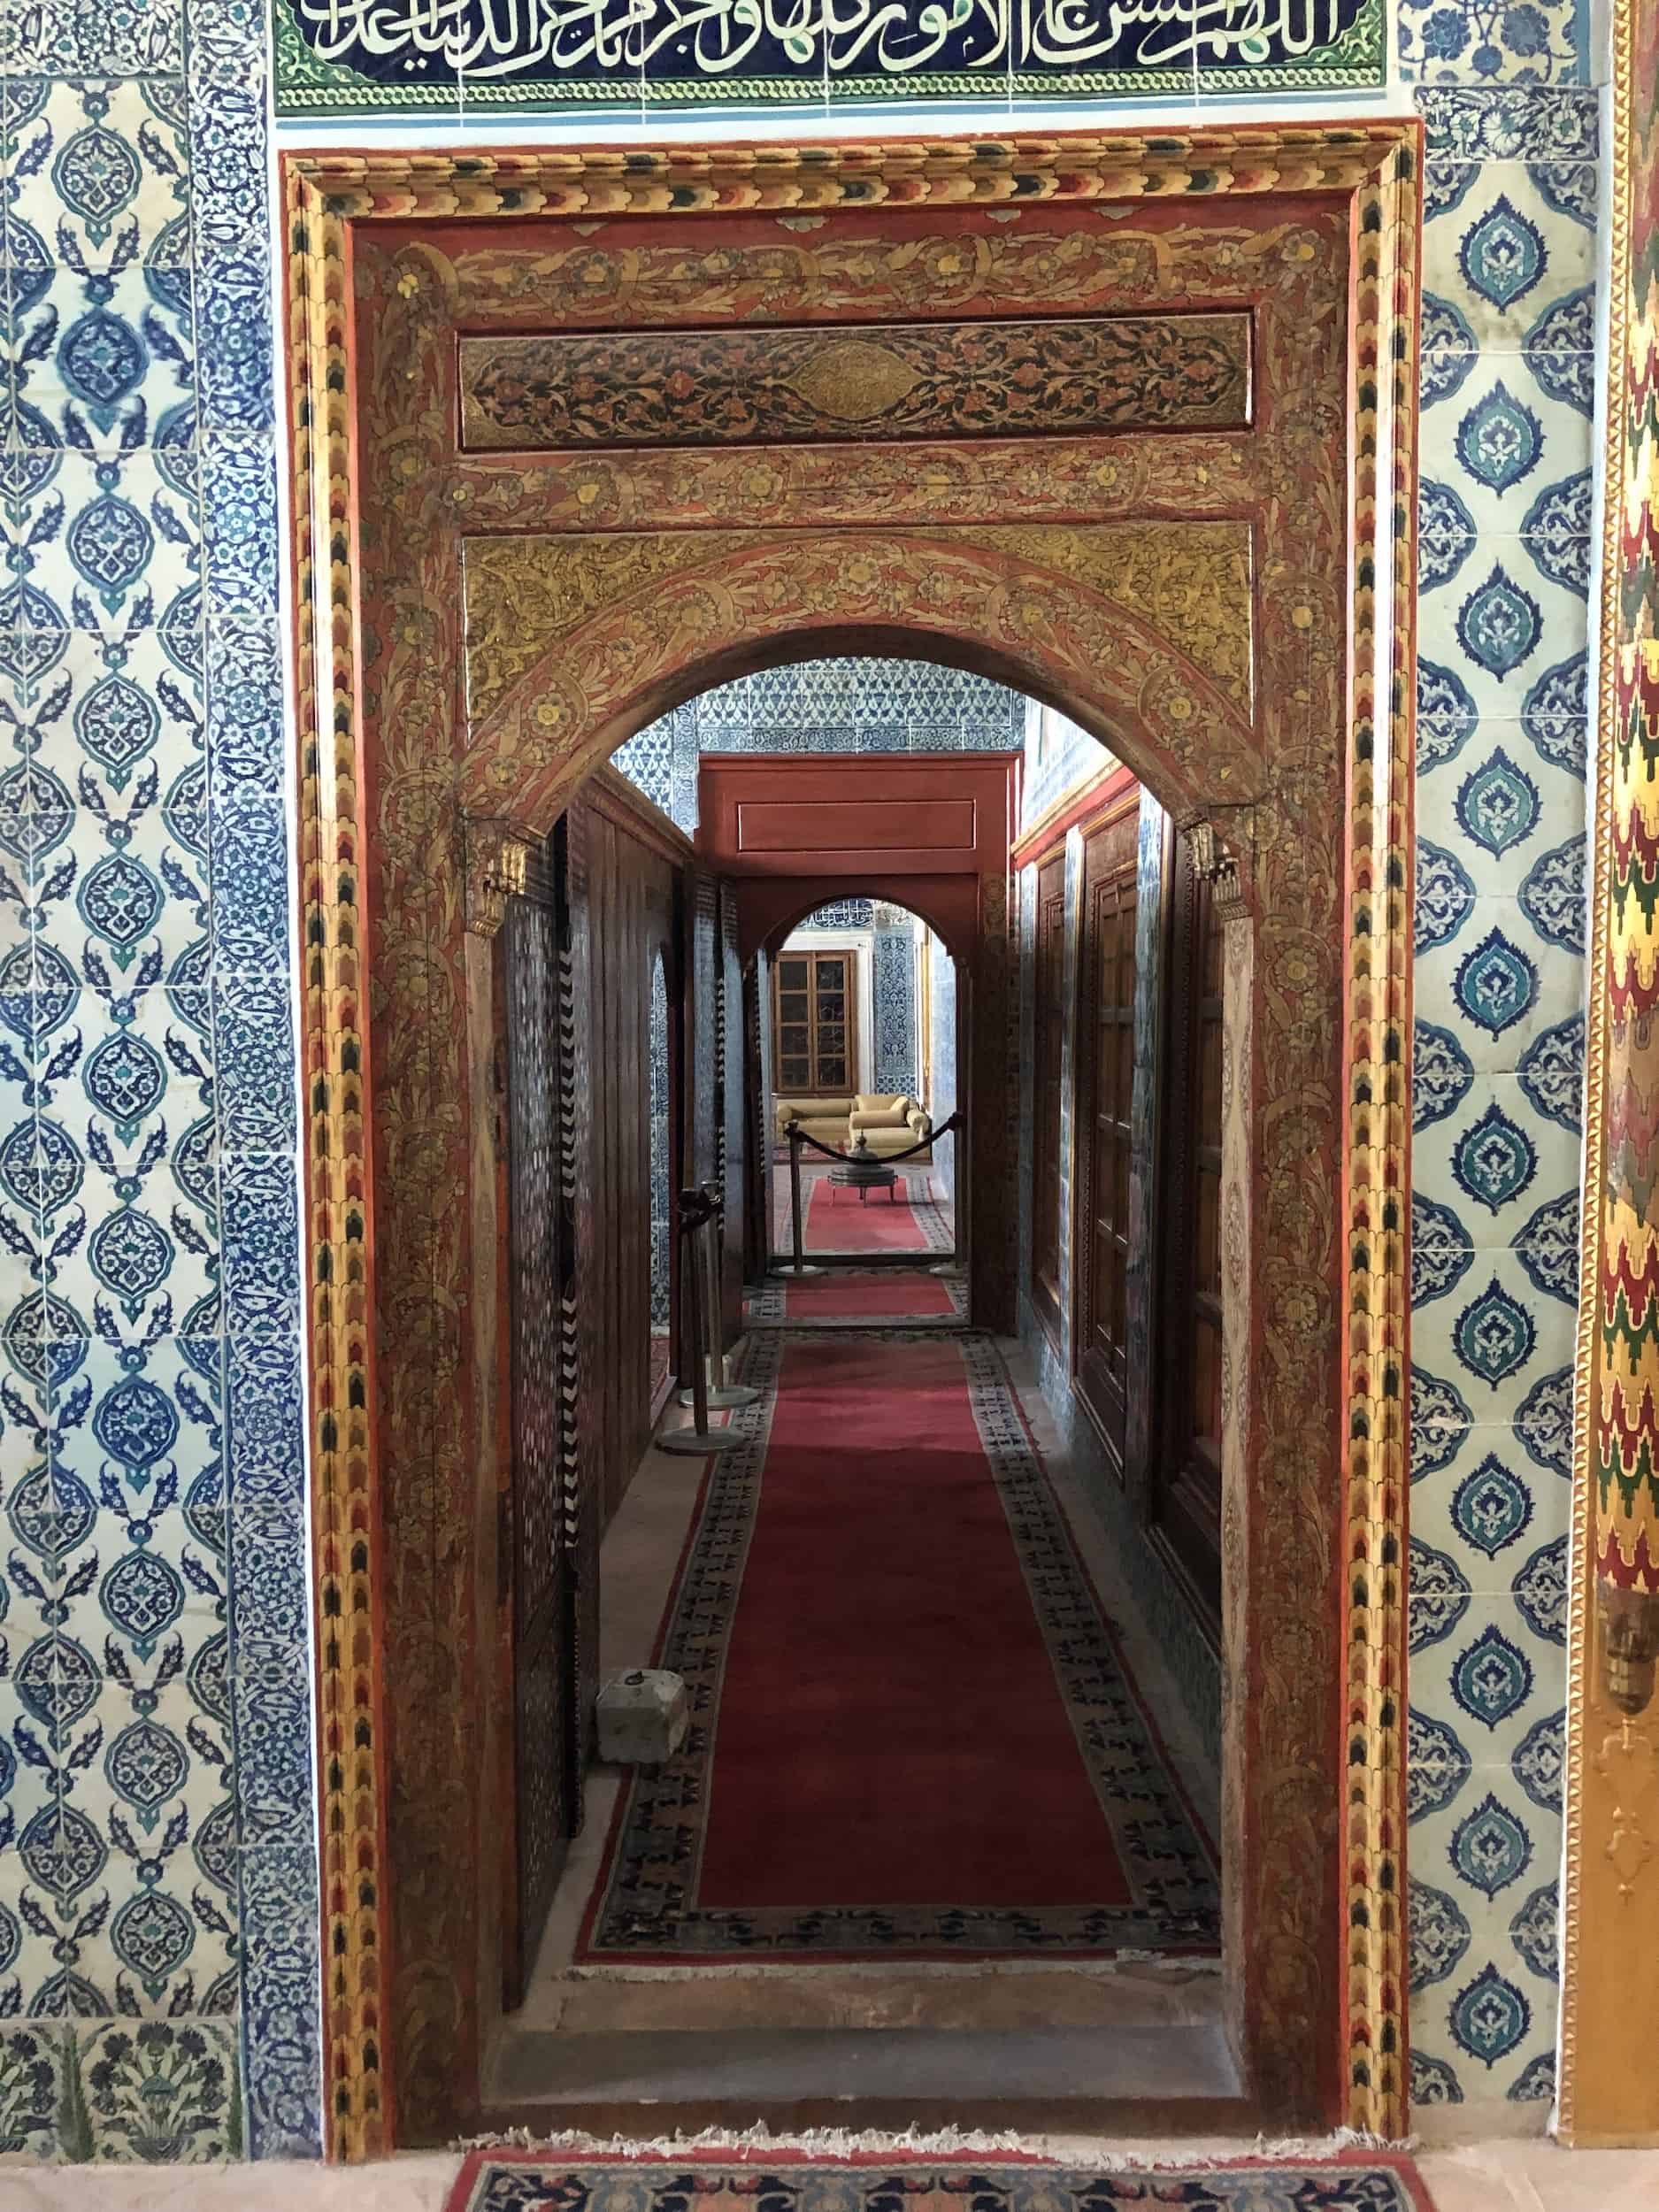 Corridor at the Sultan's Pavilion at the New Mosque in Eminönü, Istanbul, Turkey